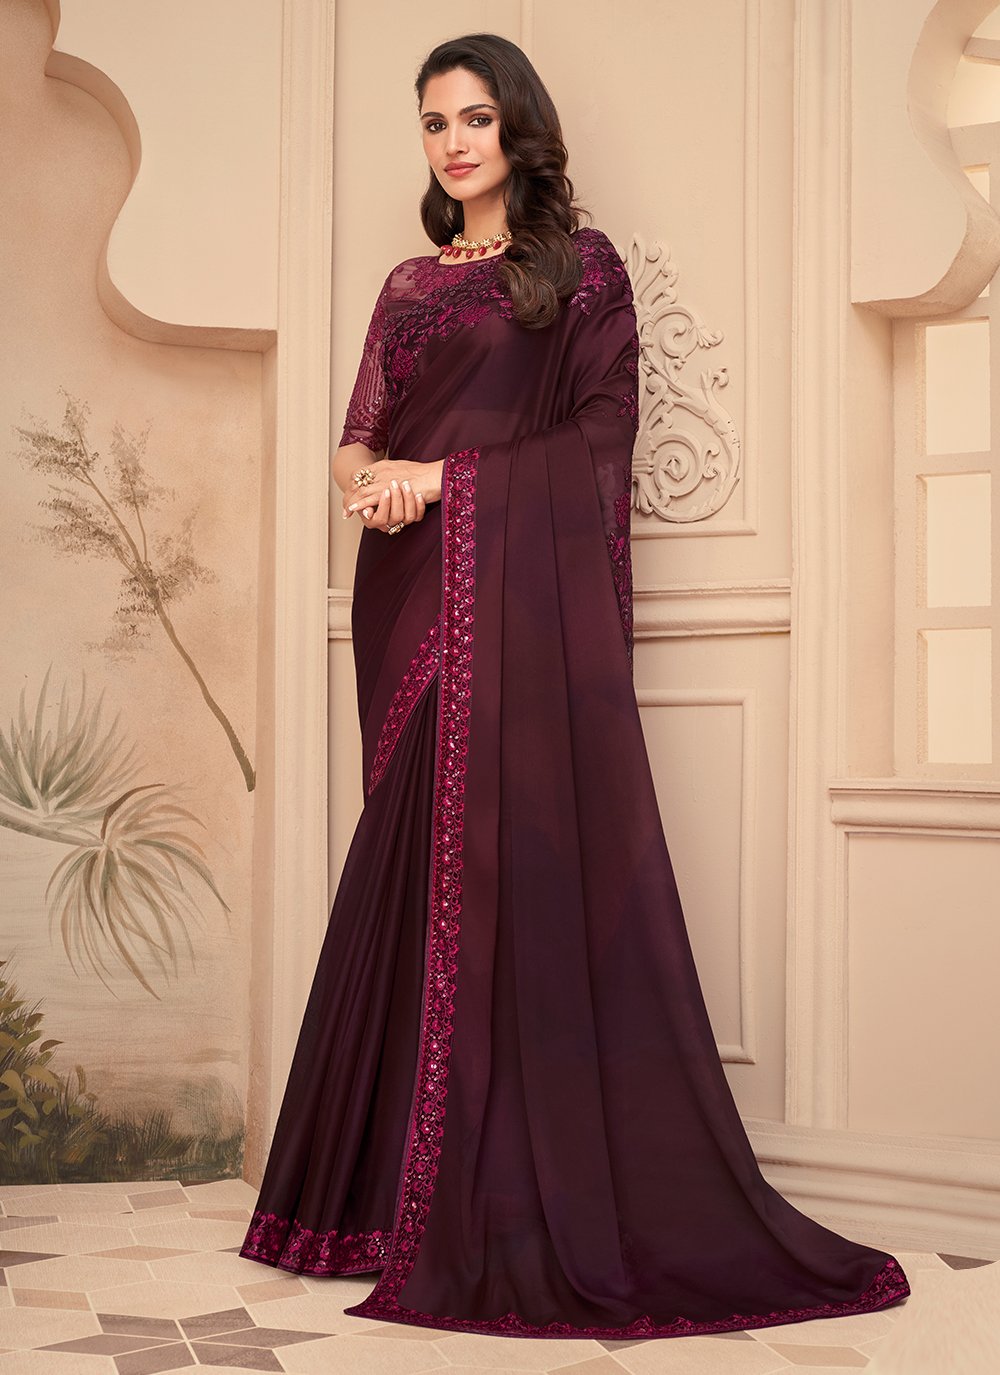 AMOHA PRESENTS DNO 1016114 SERIES INDIAN WOMEN BOLLYWOOD STYLE READY TO  WEAR LYCRA GOWN SAREE FESTIVE PARTY COCKTAIL SARI WHOLESALE COLLECTION 7424